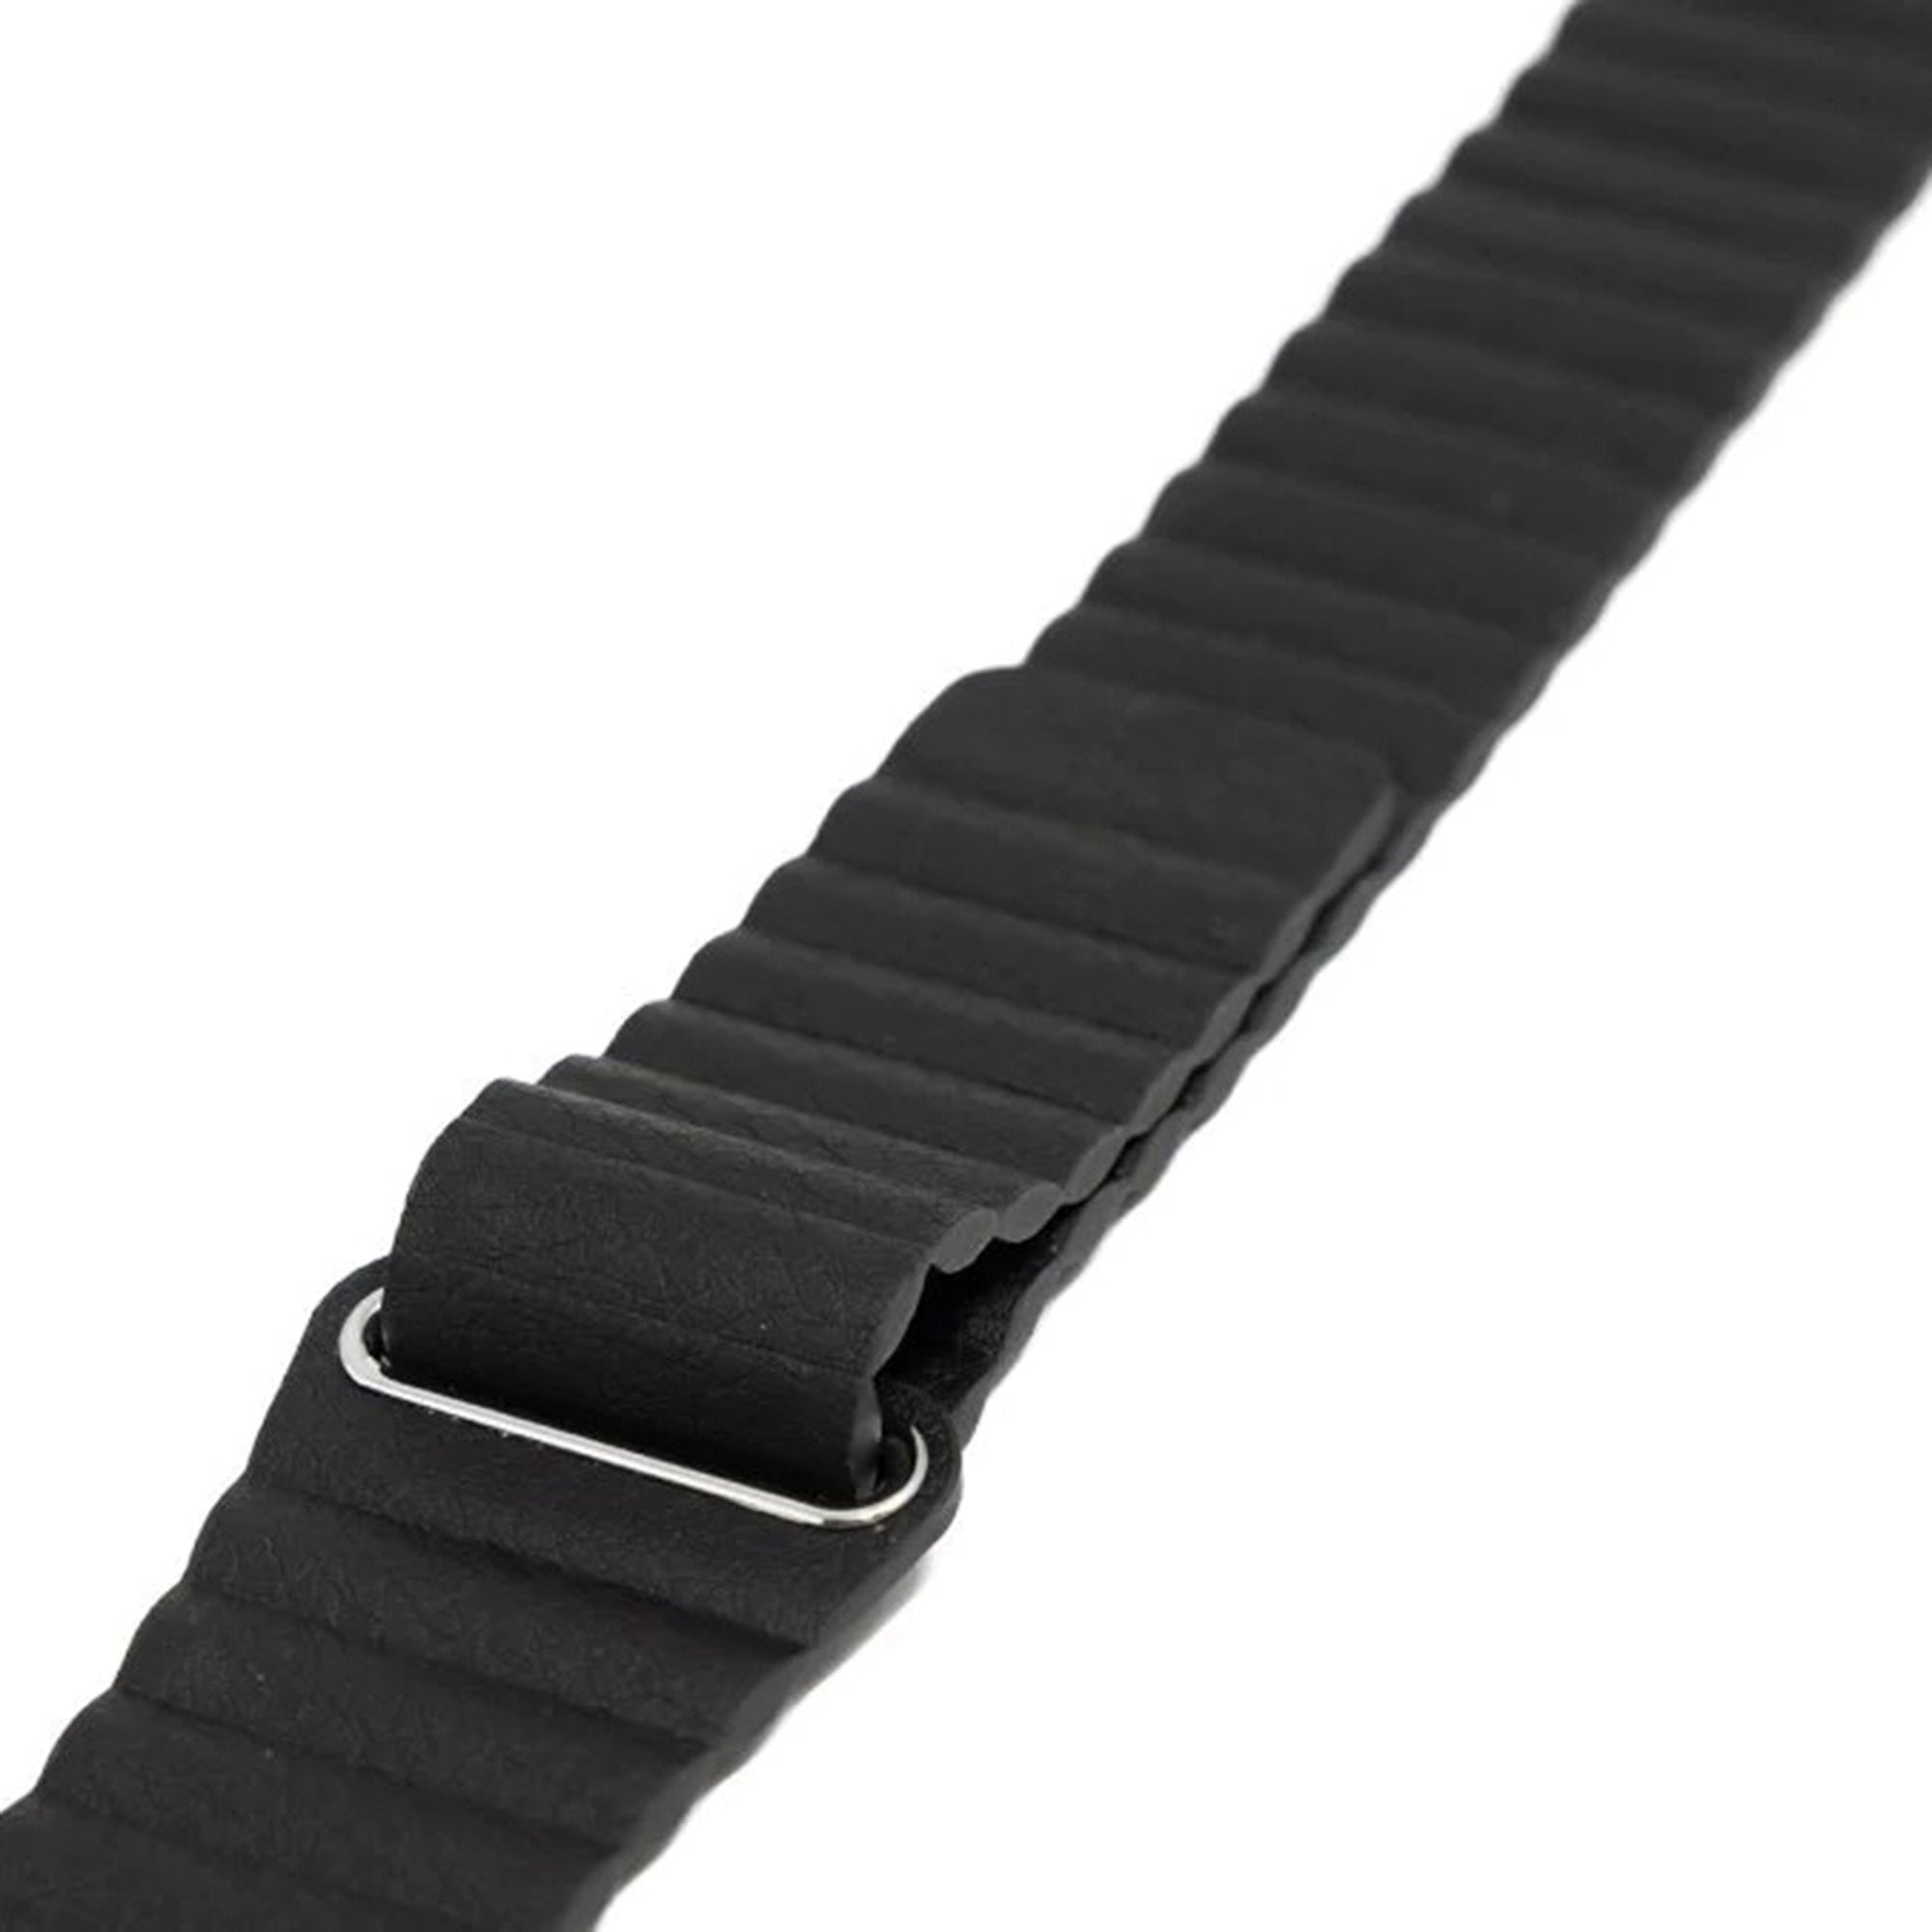 Embr Wave 2 Thermal Wristband Replacement Strap - Black Vegan Leather (1 Unit)